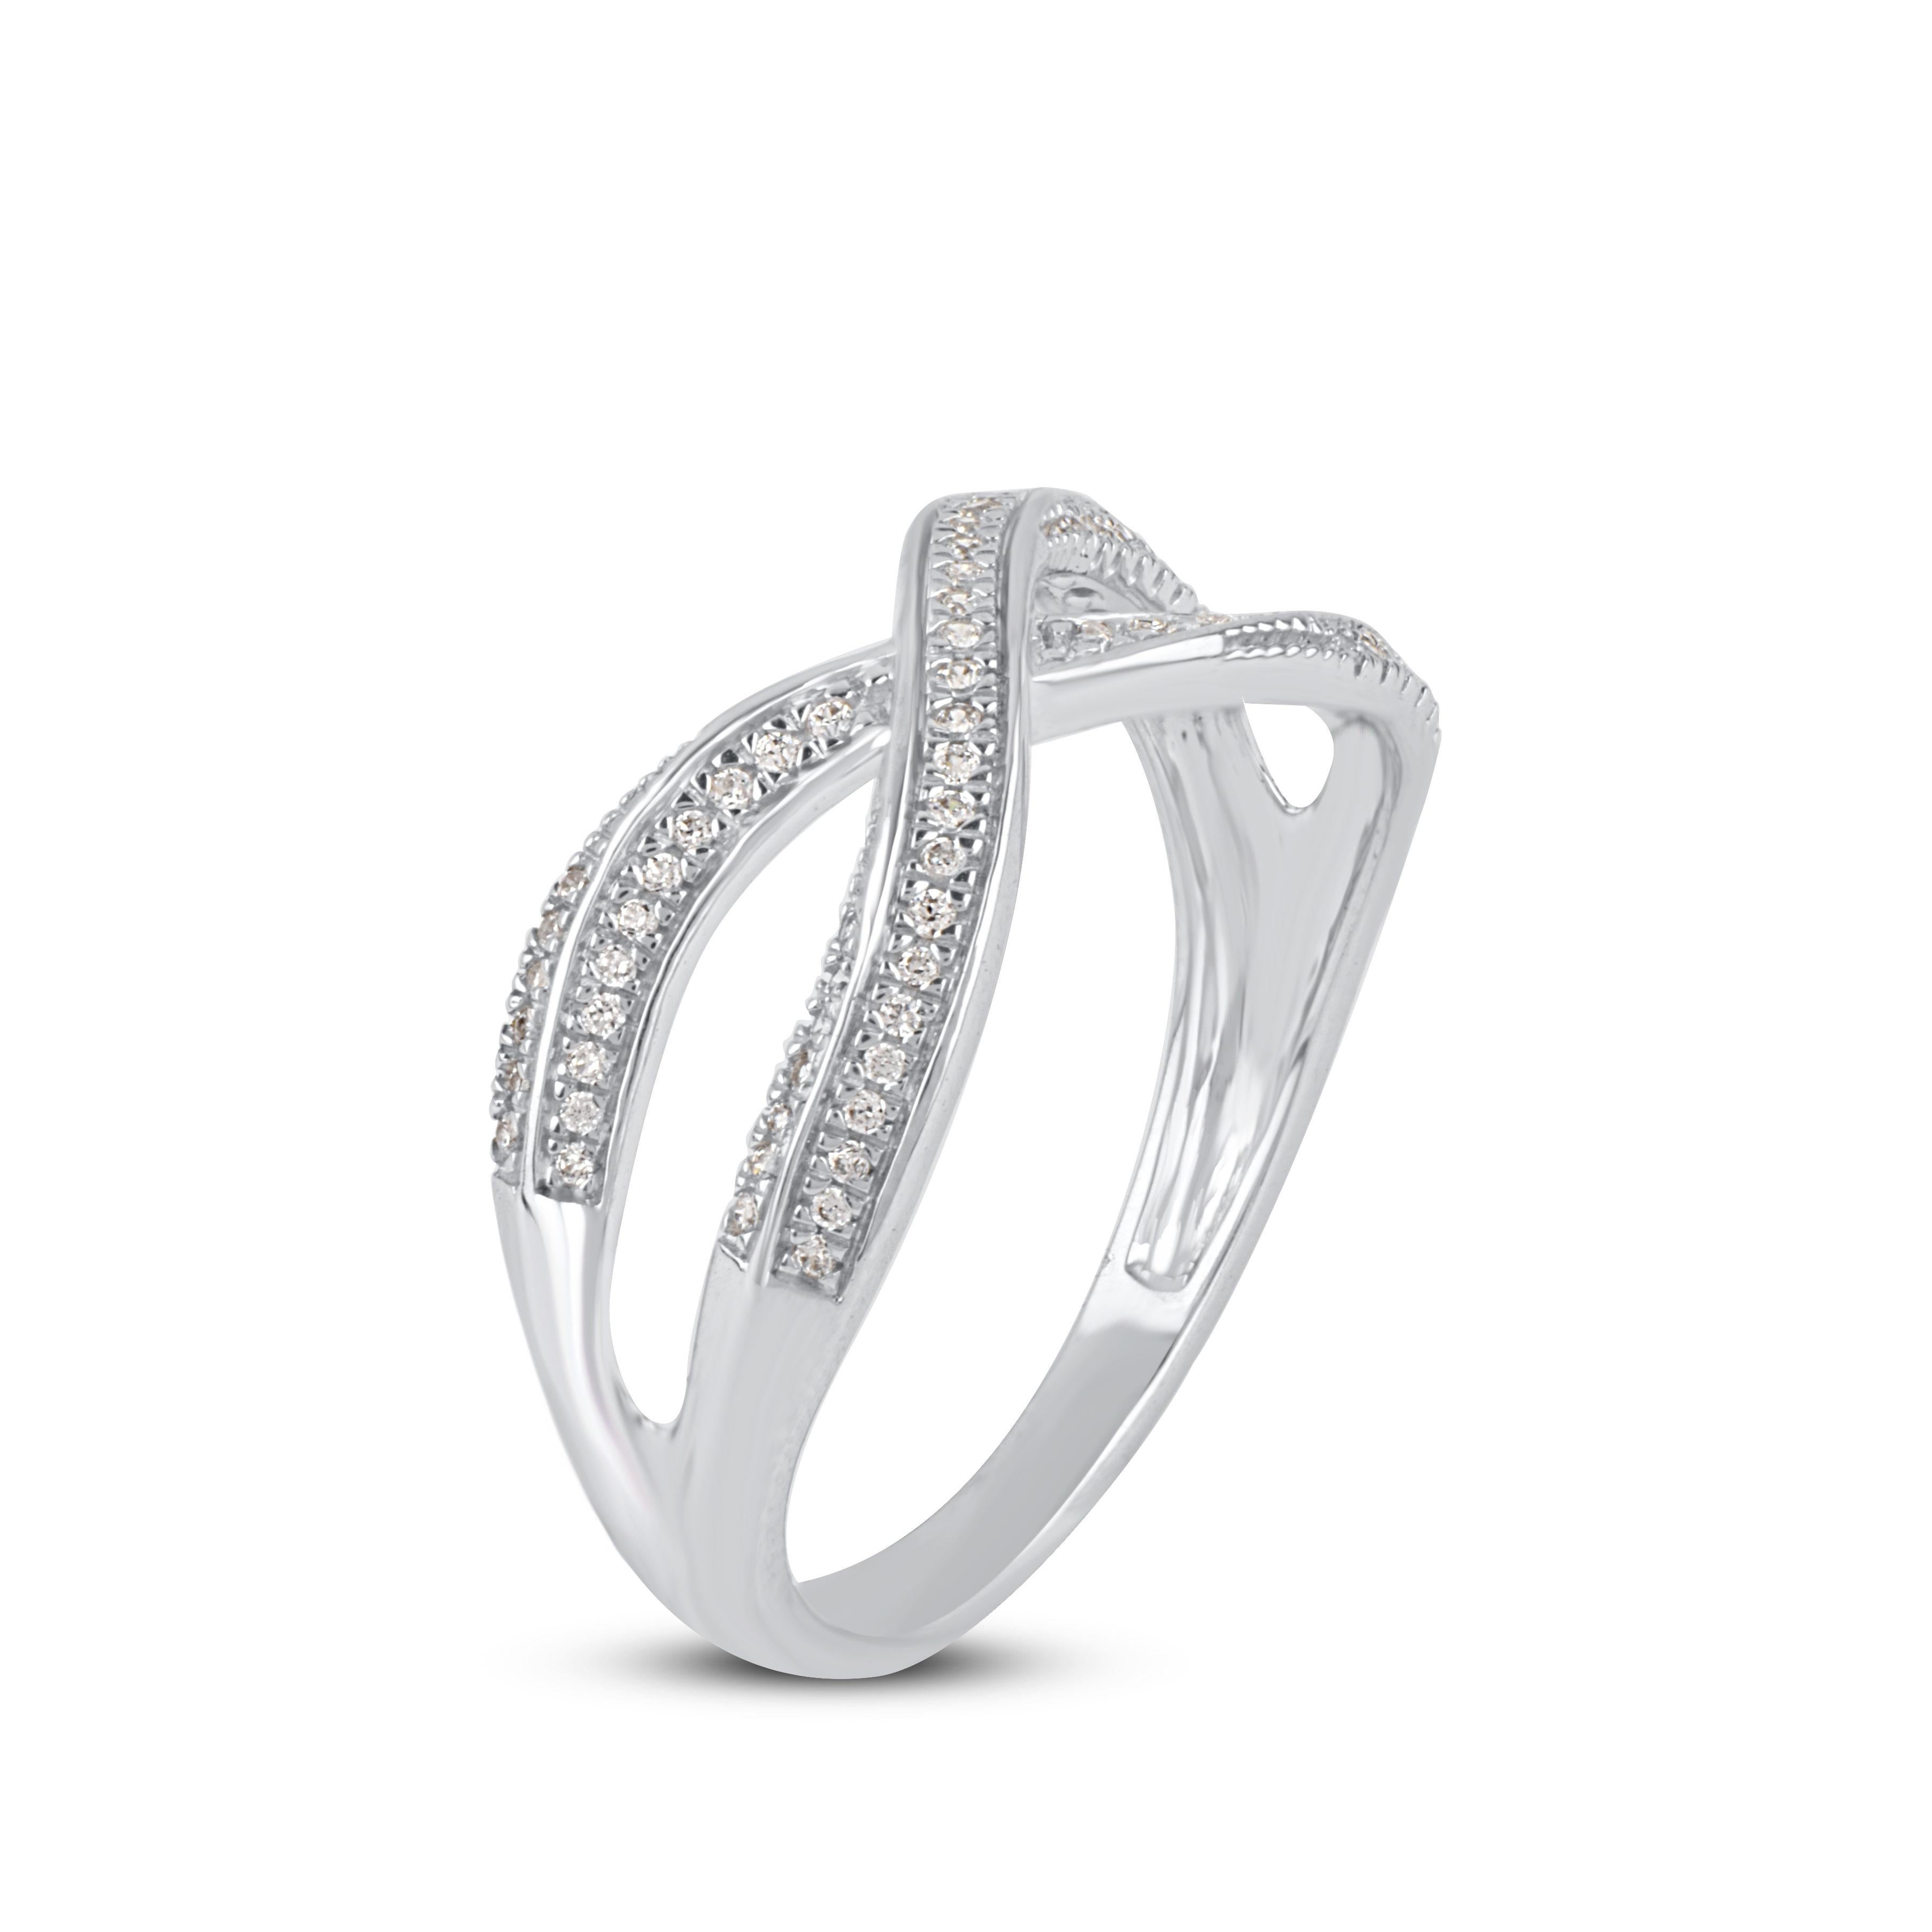 Truly exquisite, this infinity diamond wedding band ring is sure to be admired for the inherent classic beauty and elegance within its design. The total weight of diamonds 0.15 carat, H-I color, I2 Clarity. This ring is beautifully crafted in 14K